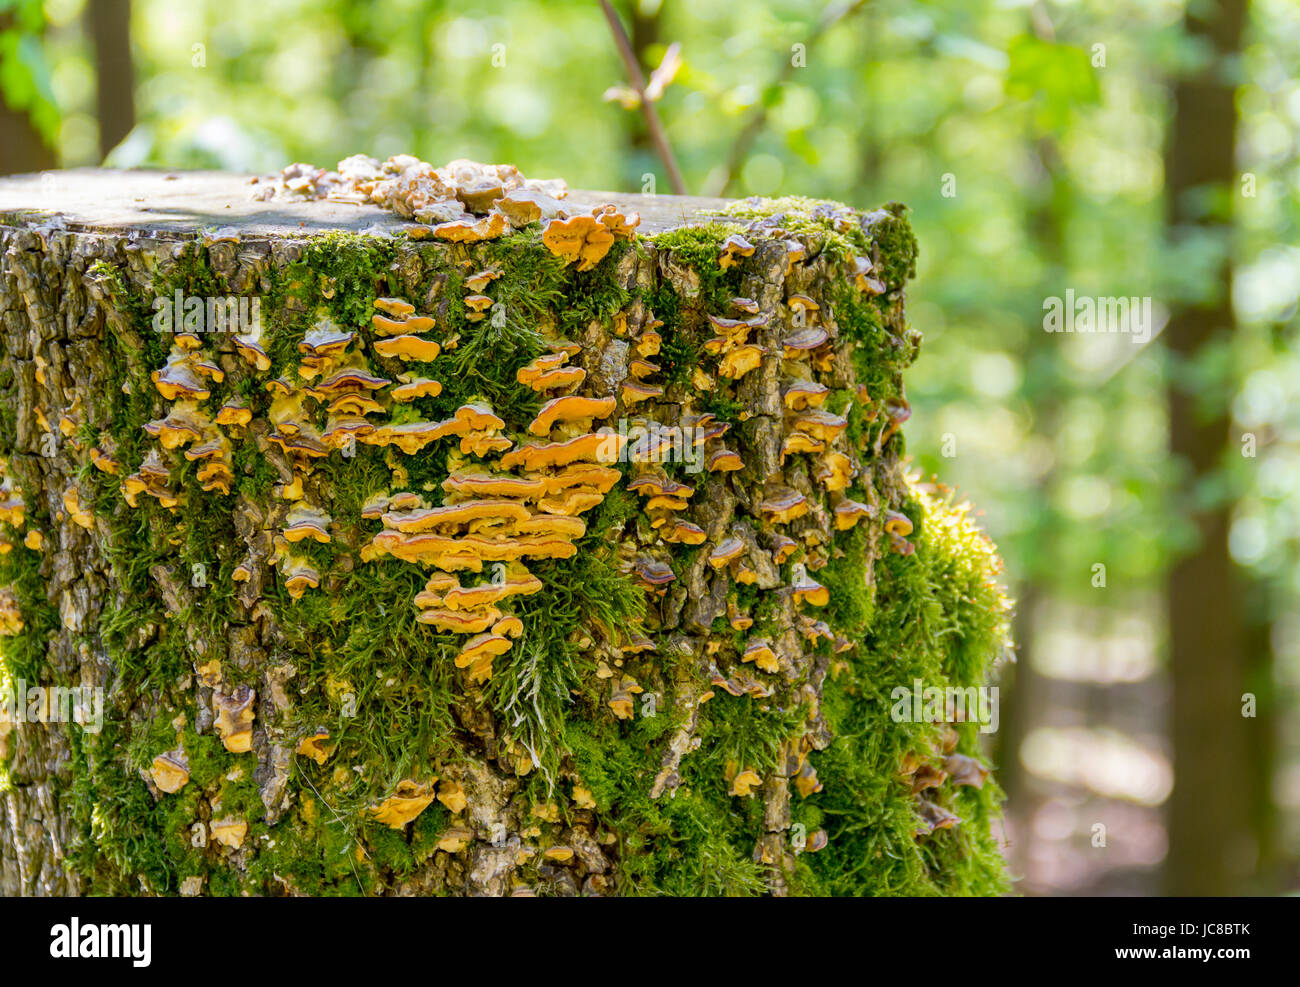 forest scenery including mushrooms on tree trunk at early spring time Stock Photo